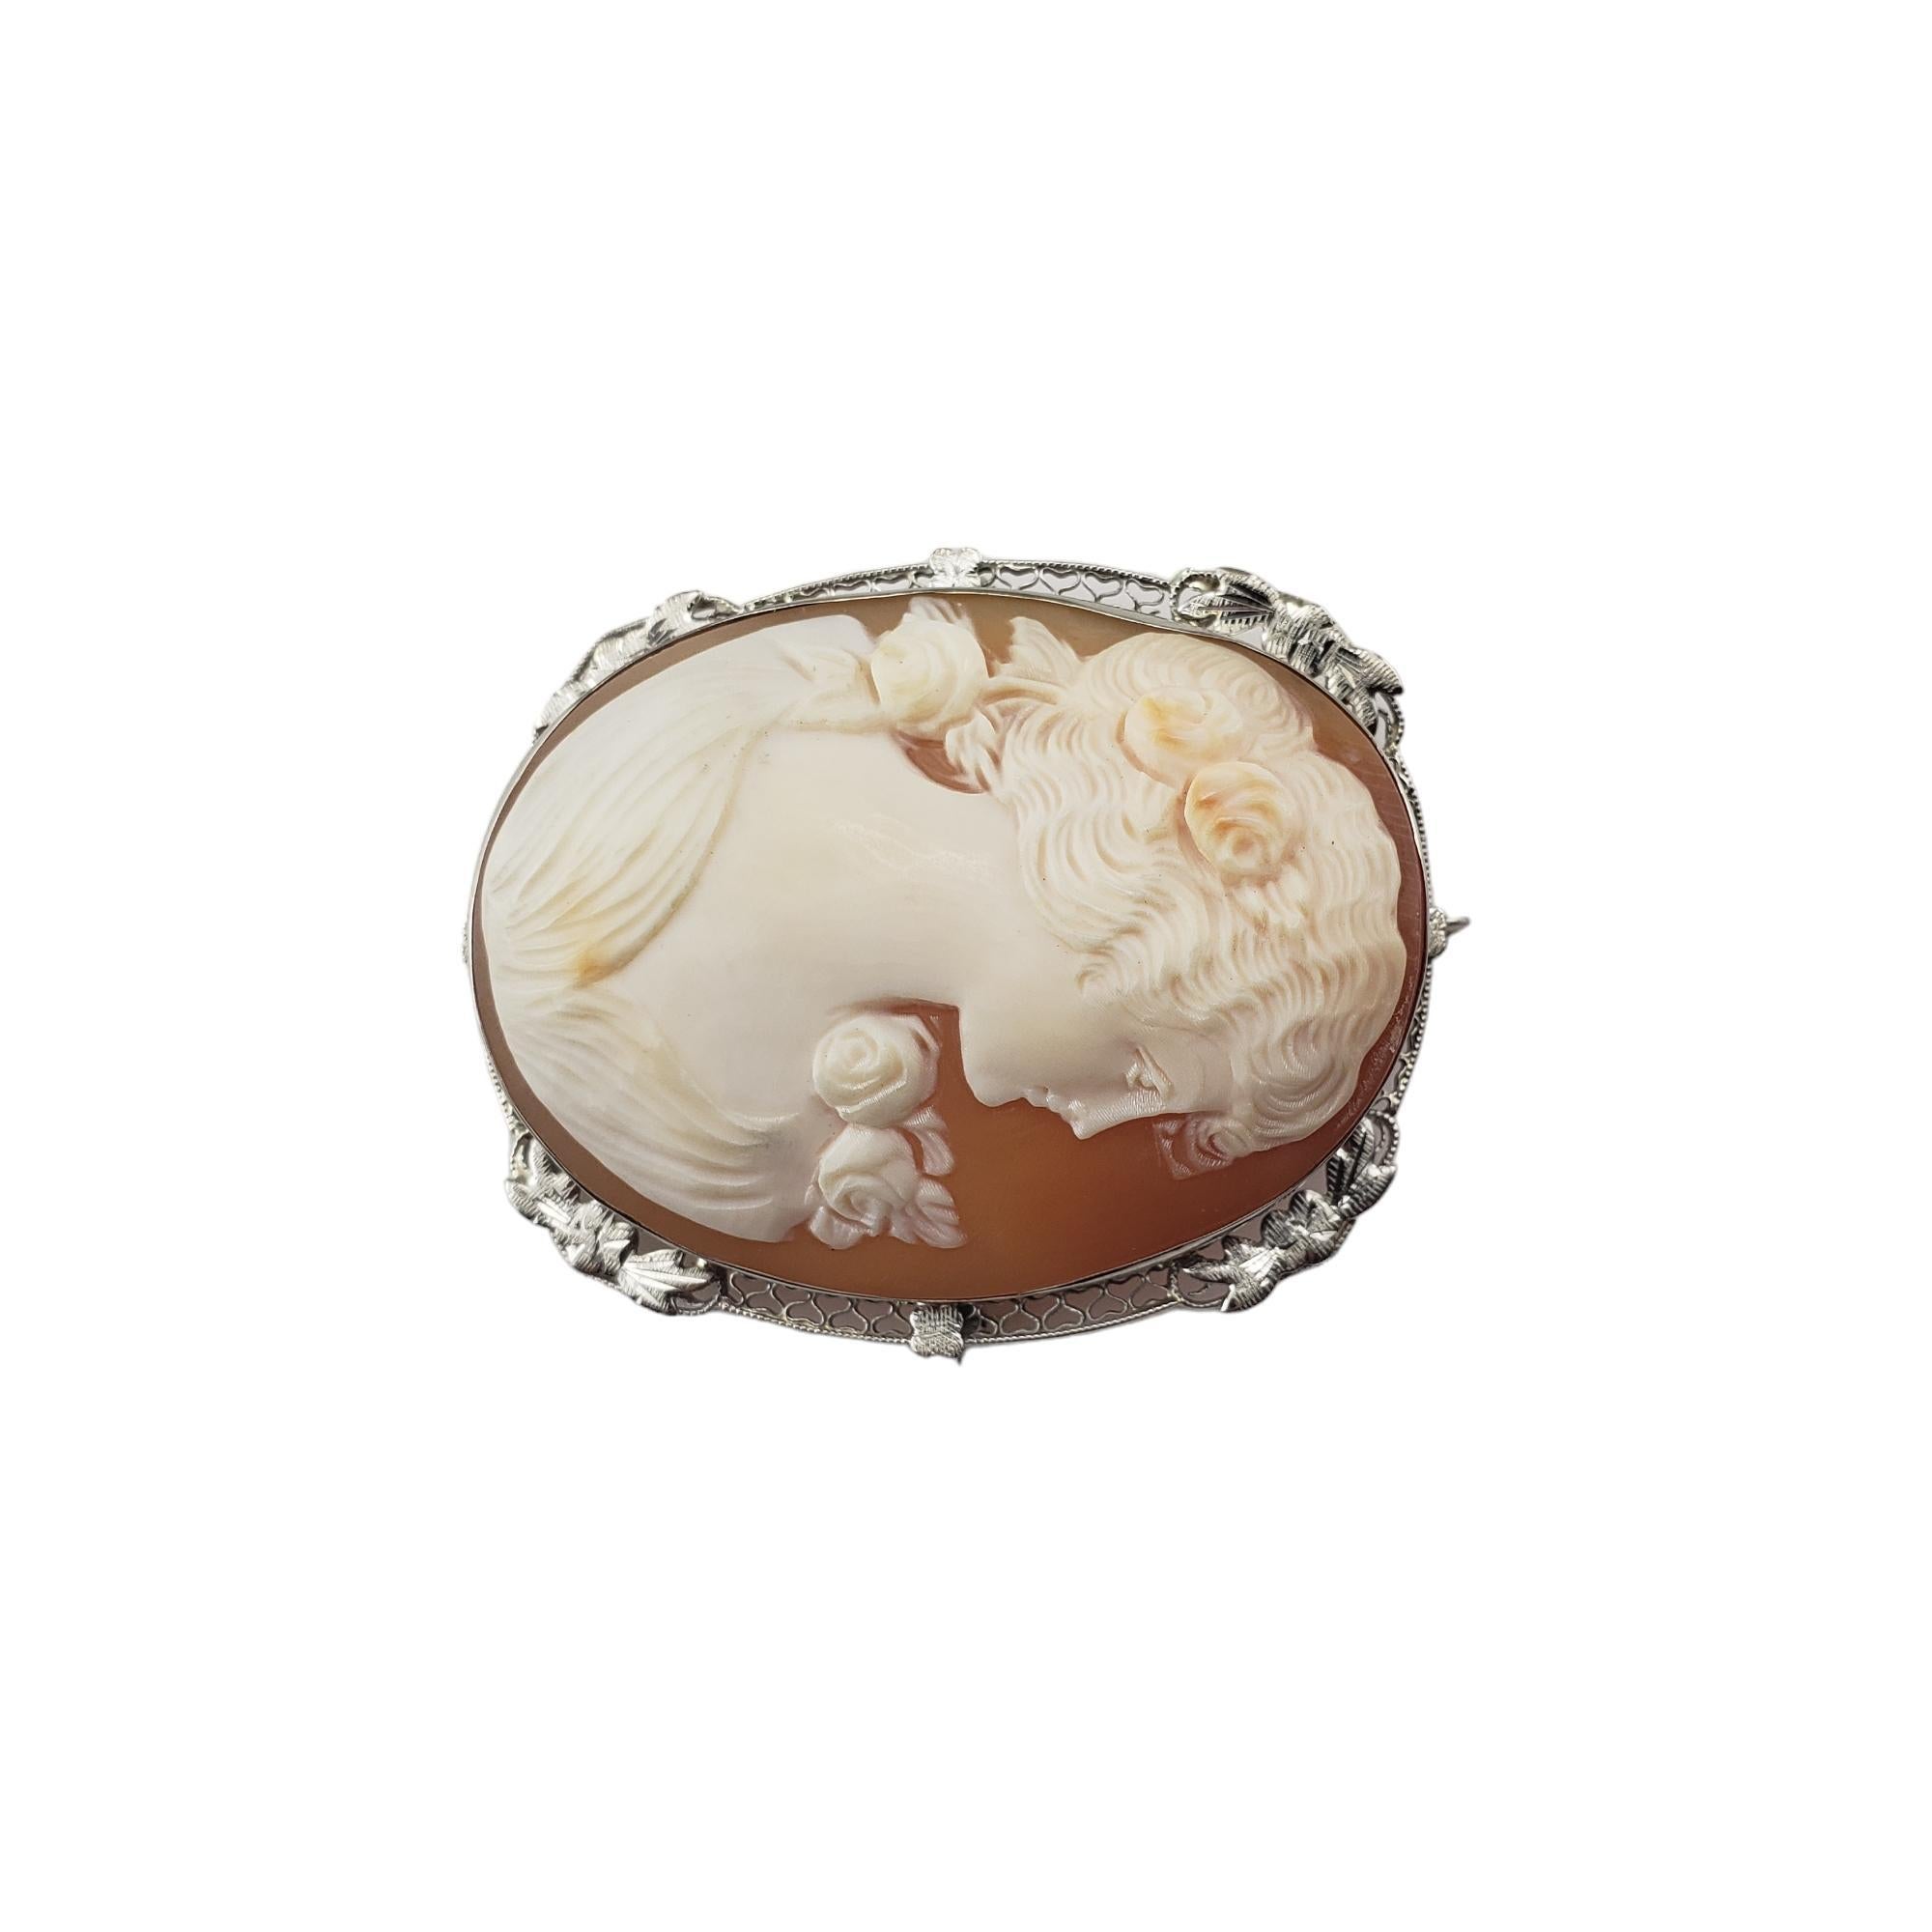 14 Karat White Gold Cameo Brooch/Pendant #15511 In Good Condition For Sale In Washington Depot, CT